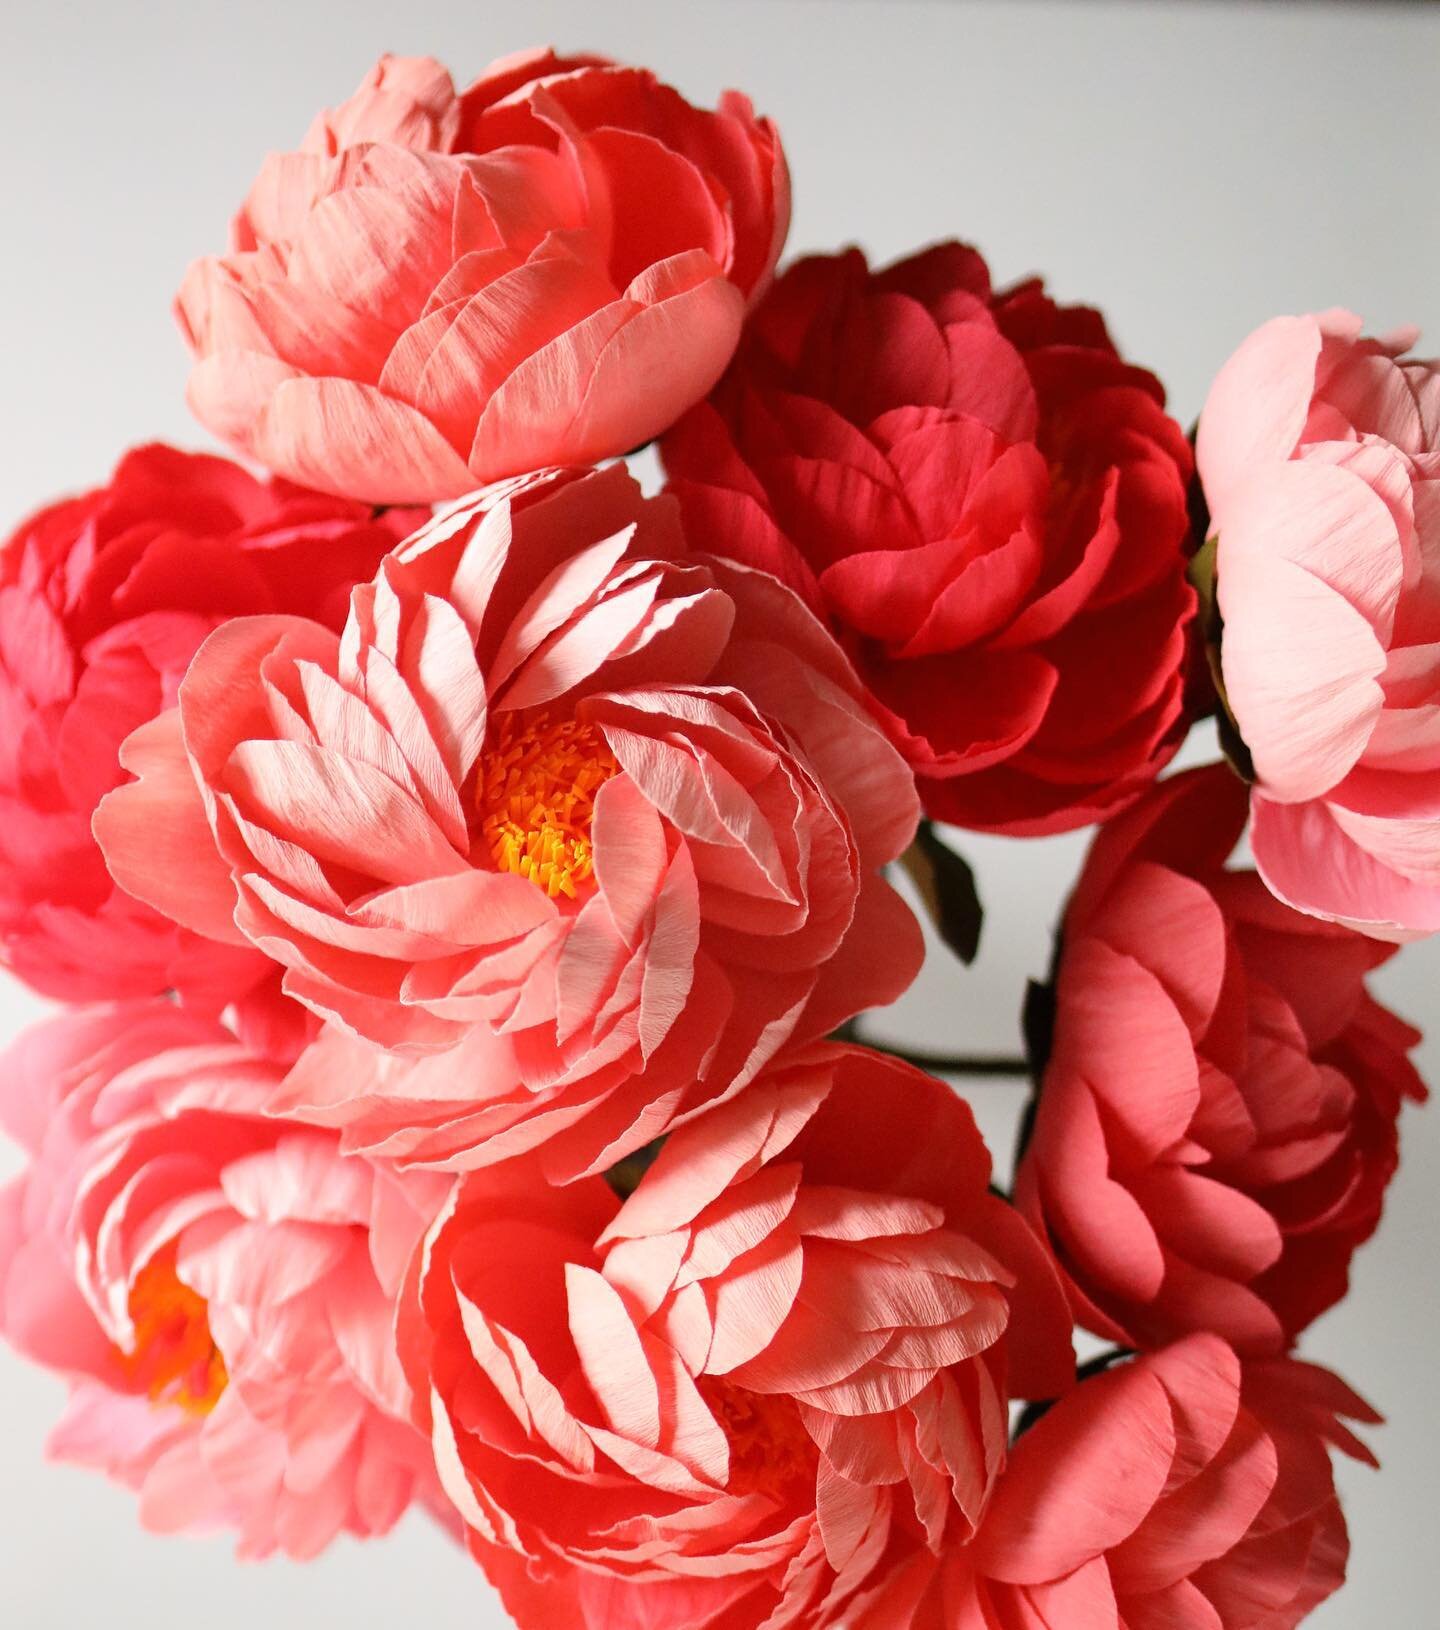 Coral Charms, anyone?! Love these vibrant colors. Be sure to mark your calendars for the @indianapeonyfestival on May 20th! #crepepaperflowers #paperflowers #paperpeony #peony #coralcharmpeony #coralcharm #indianapapercompany #paperartist #paperart #